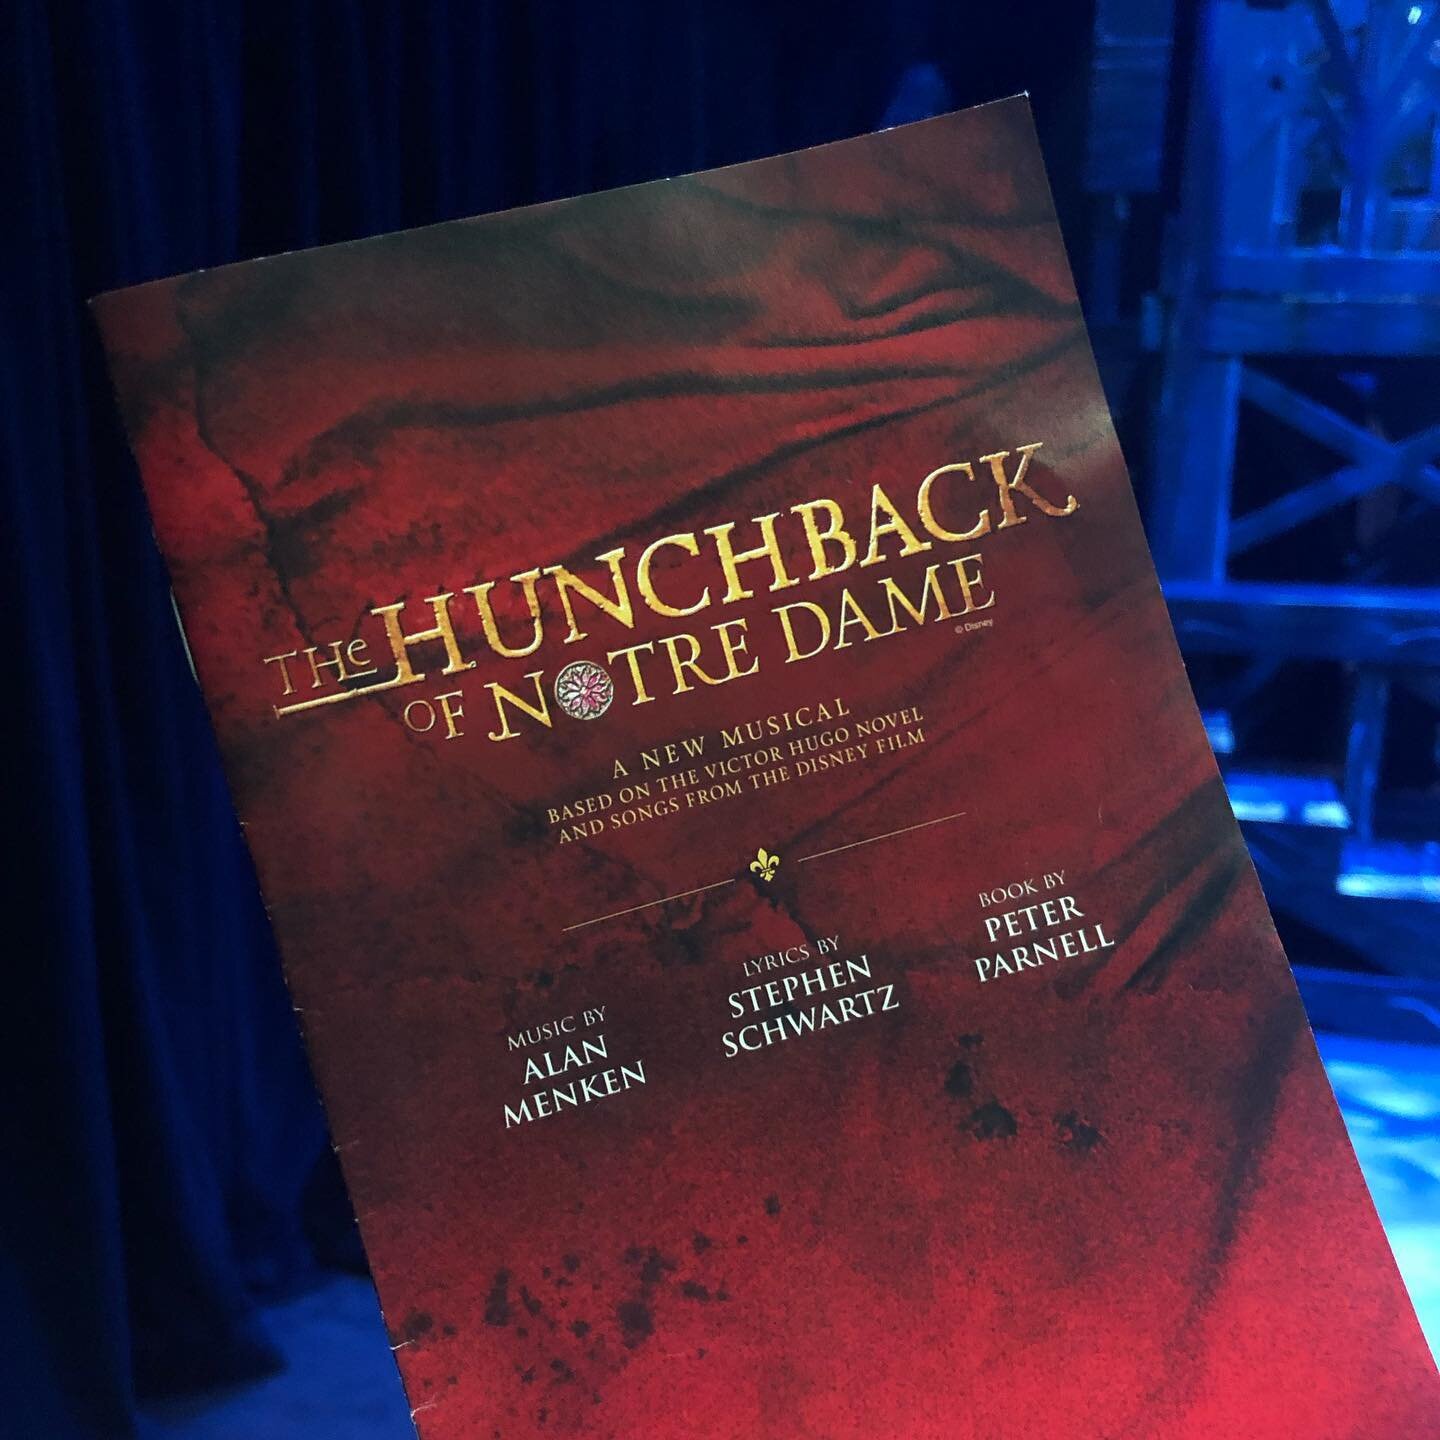 Well this was fantastic! I&rsquo;ve never read the novel, never seen the Disney movie, and never seen the musical&mdash; until now. 

With an ensemble chorus of stones, theatrical-style narration, and center stage costuming of Quasimodo &mdash; this 